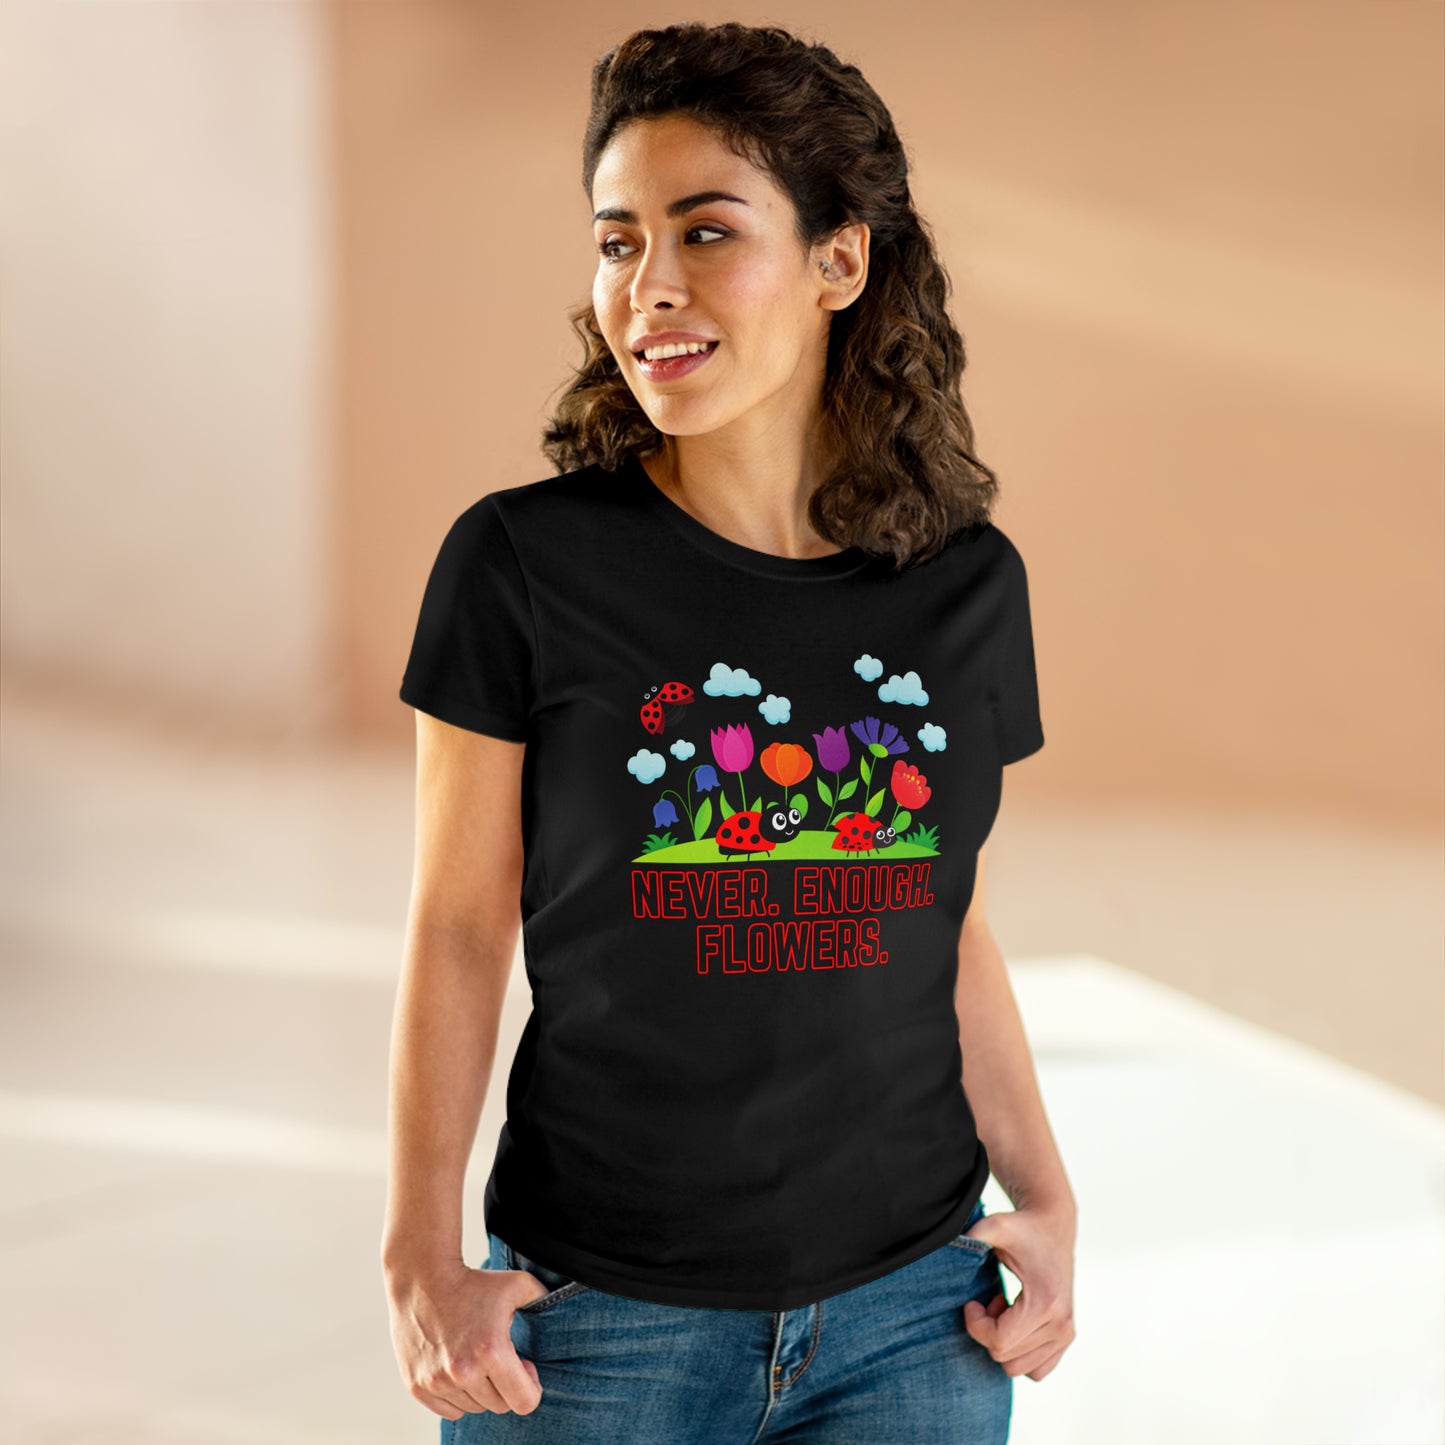 Nature, Plants, Never Enough Flowers Ladybug Bug- Adult, Semi-fitted, T-shirts